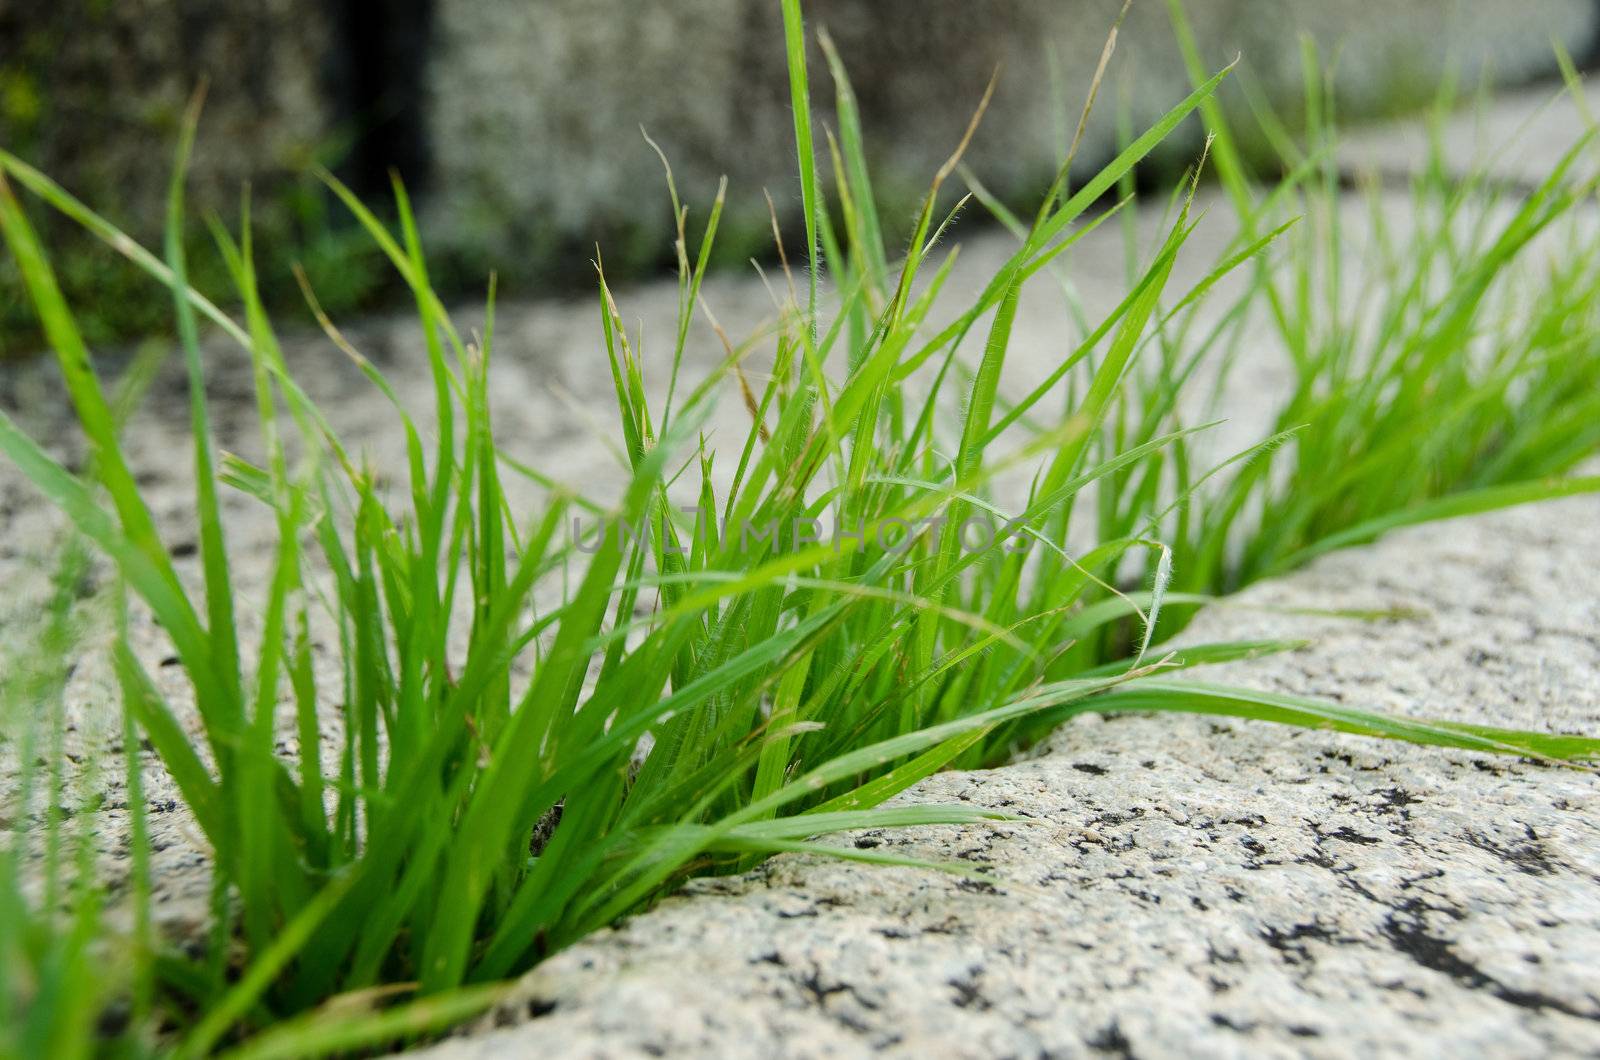 Grass growing out of a big granite stone and breaking it open